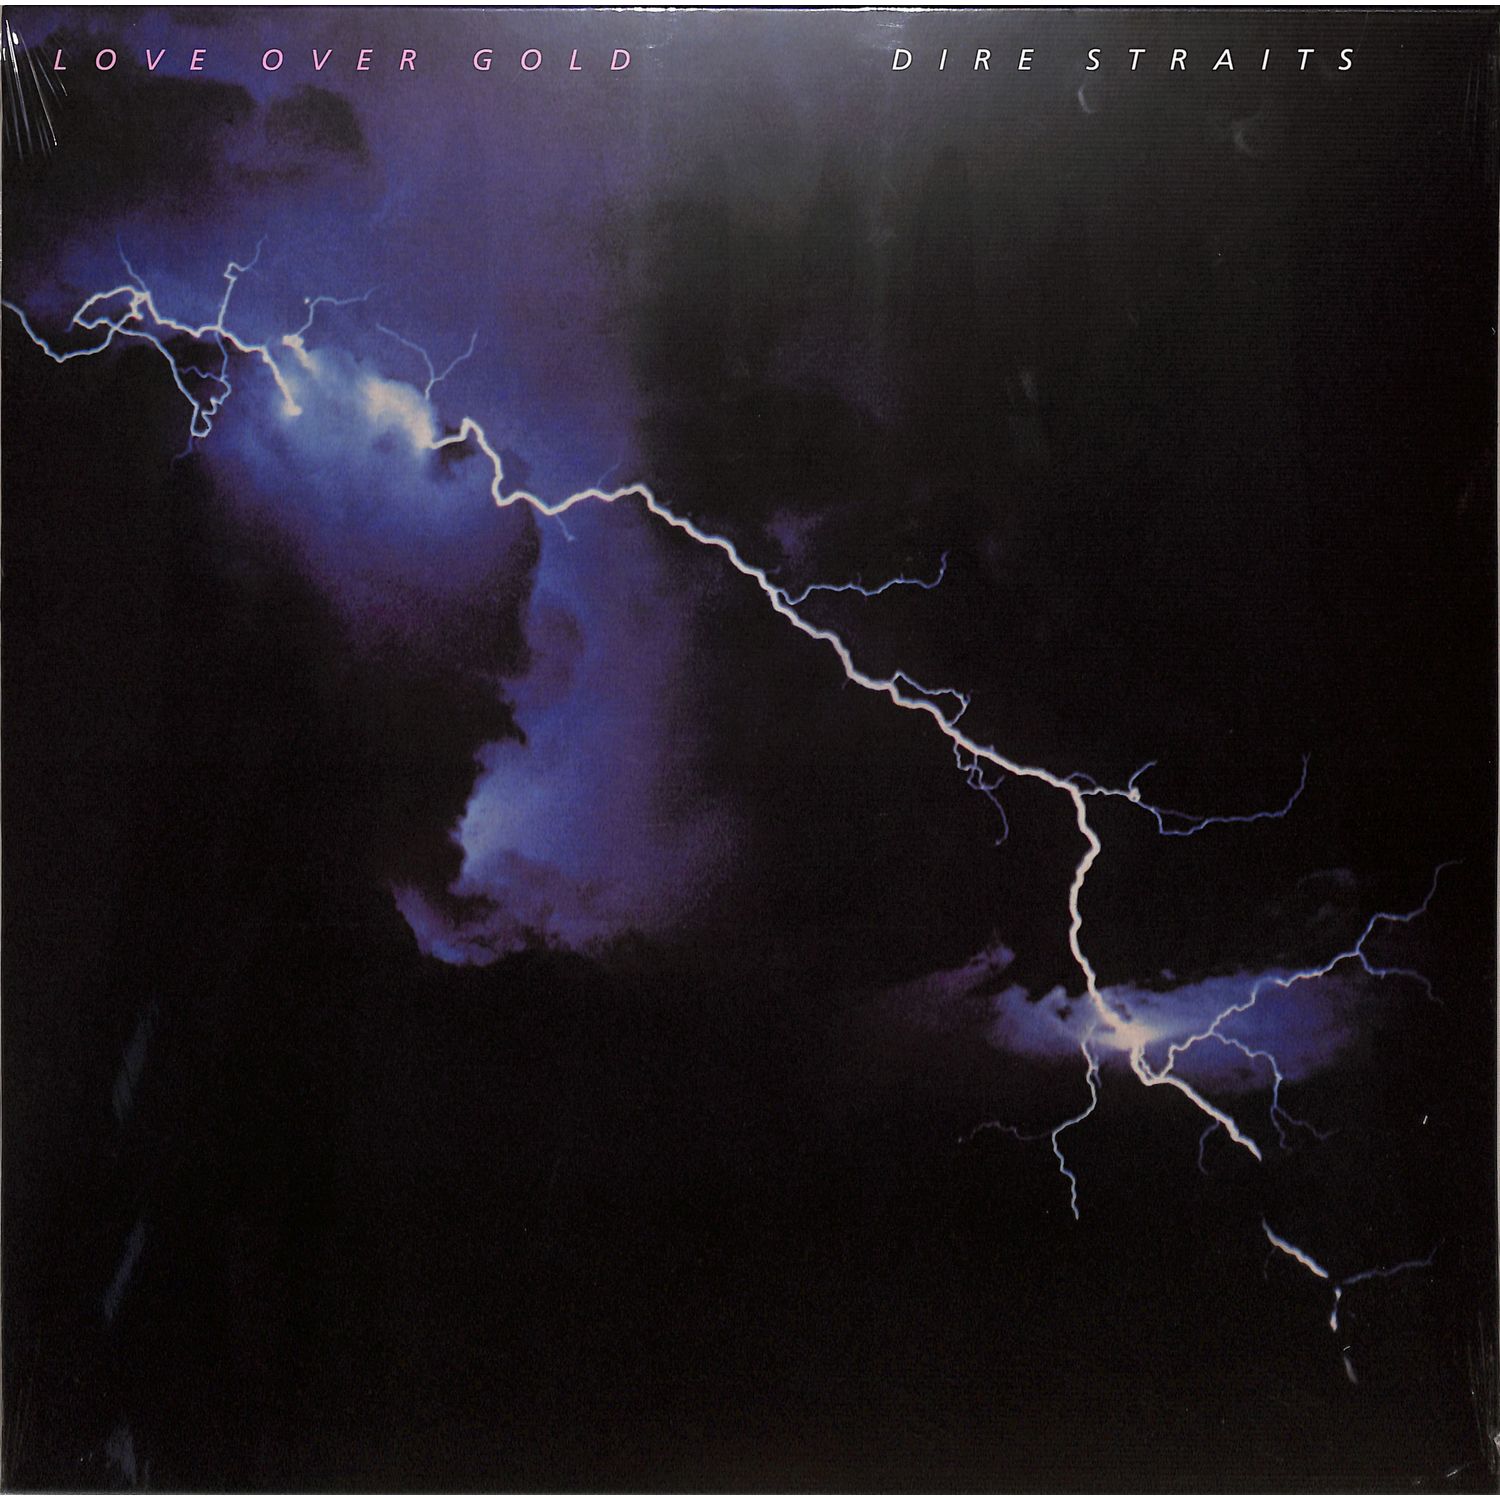 Dire Straits - LOVE OVER GOLD 